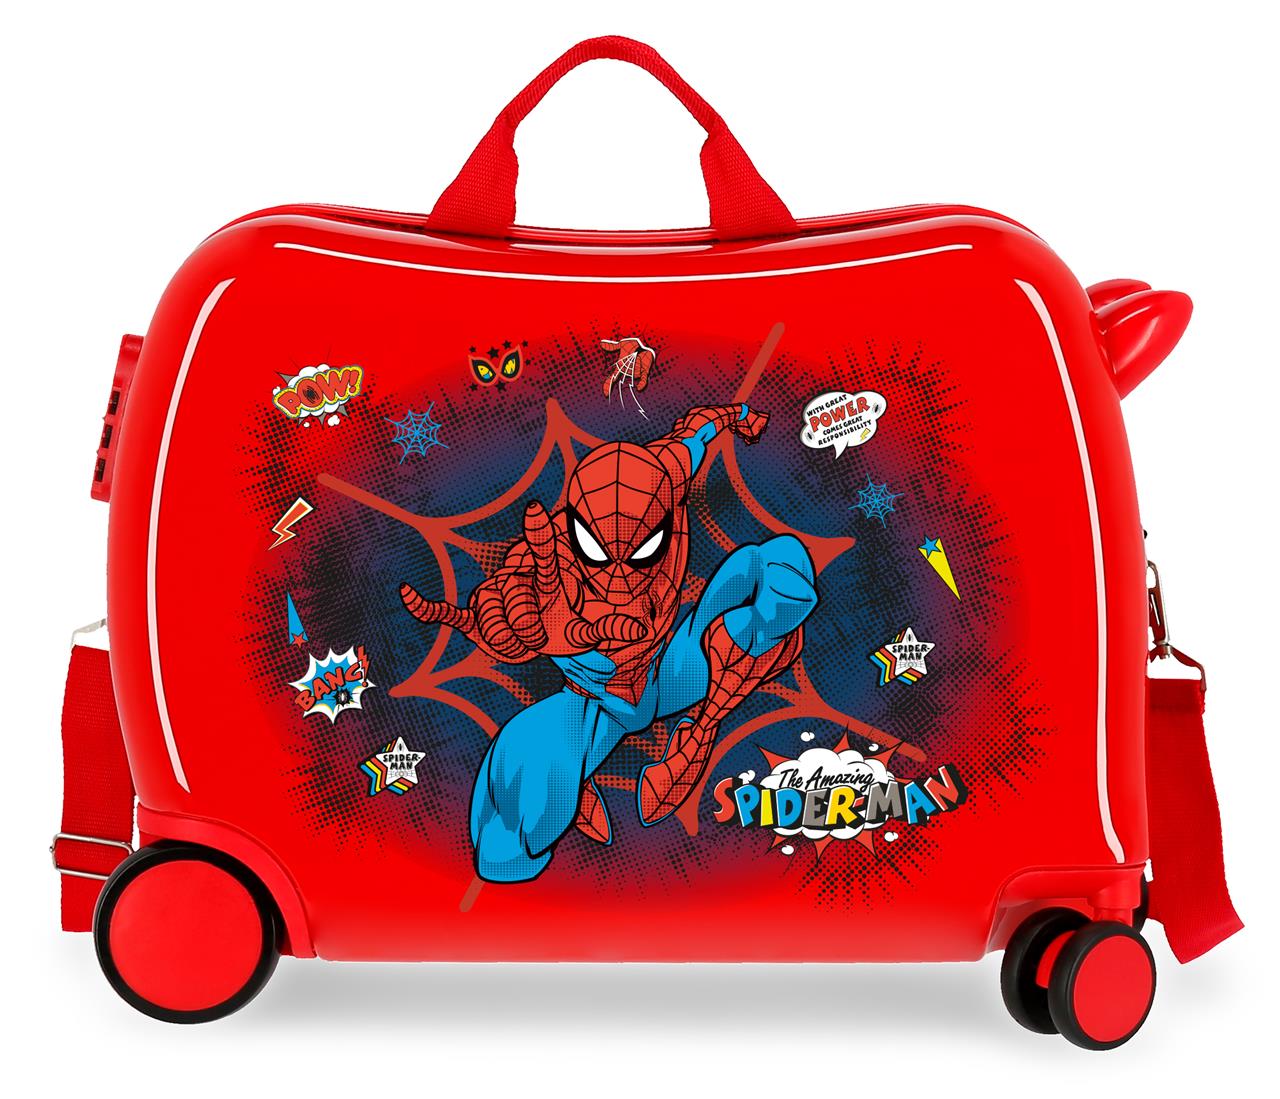 Spiderman Ride on Suitcase Red Kids aged 3-7 - liquidation.store